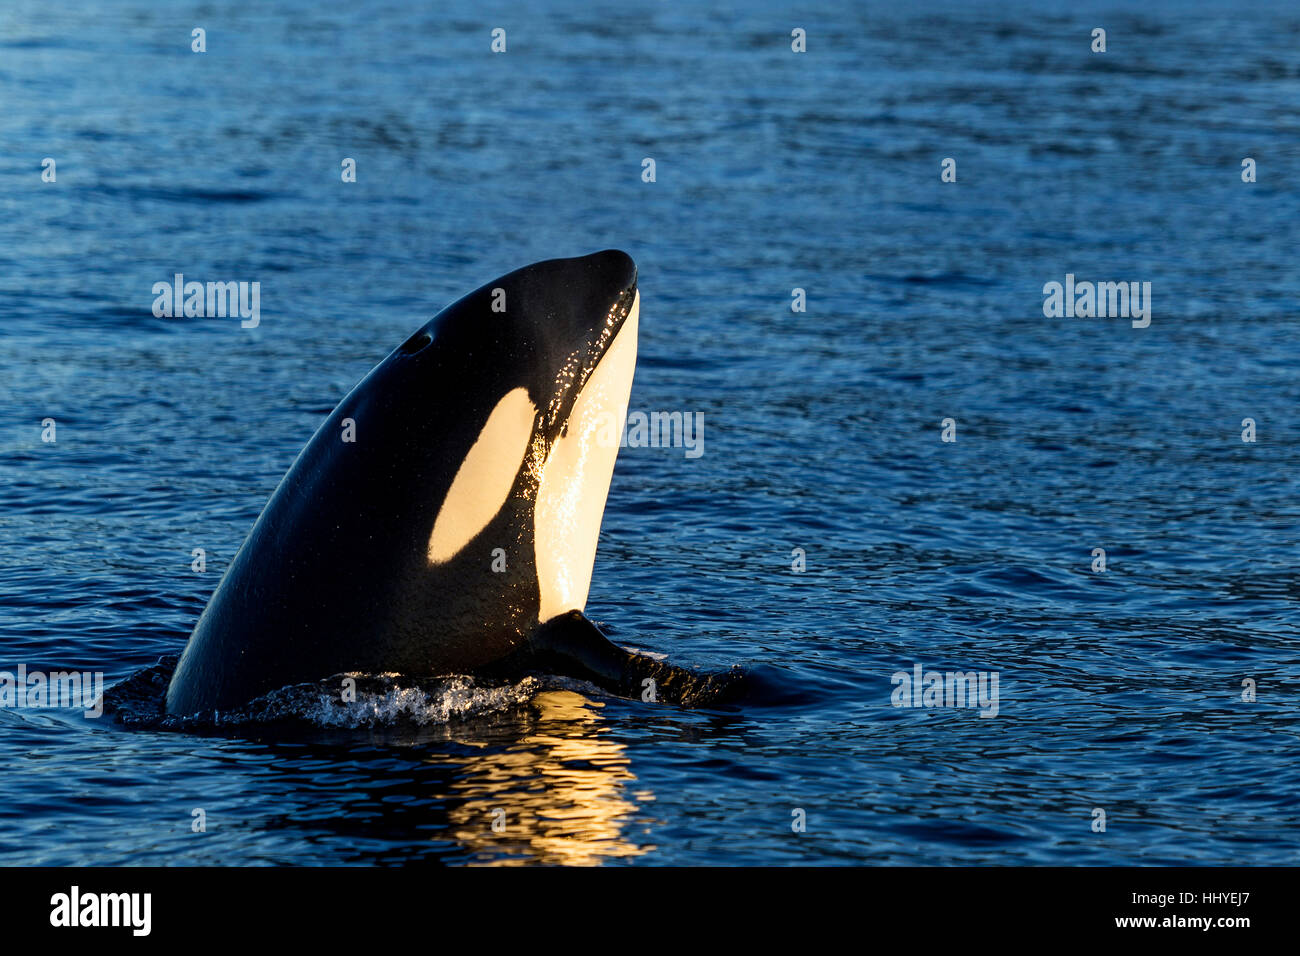 Orca (Orcinus orca) looking out of the water, Spyhopping, Kaldfjorden, Tromvik, Norway Stock Photo